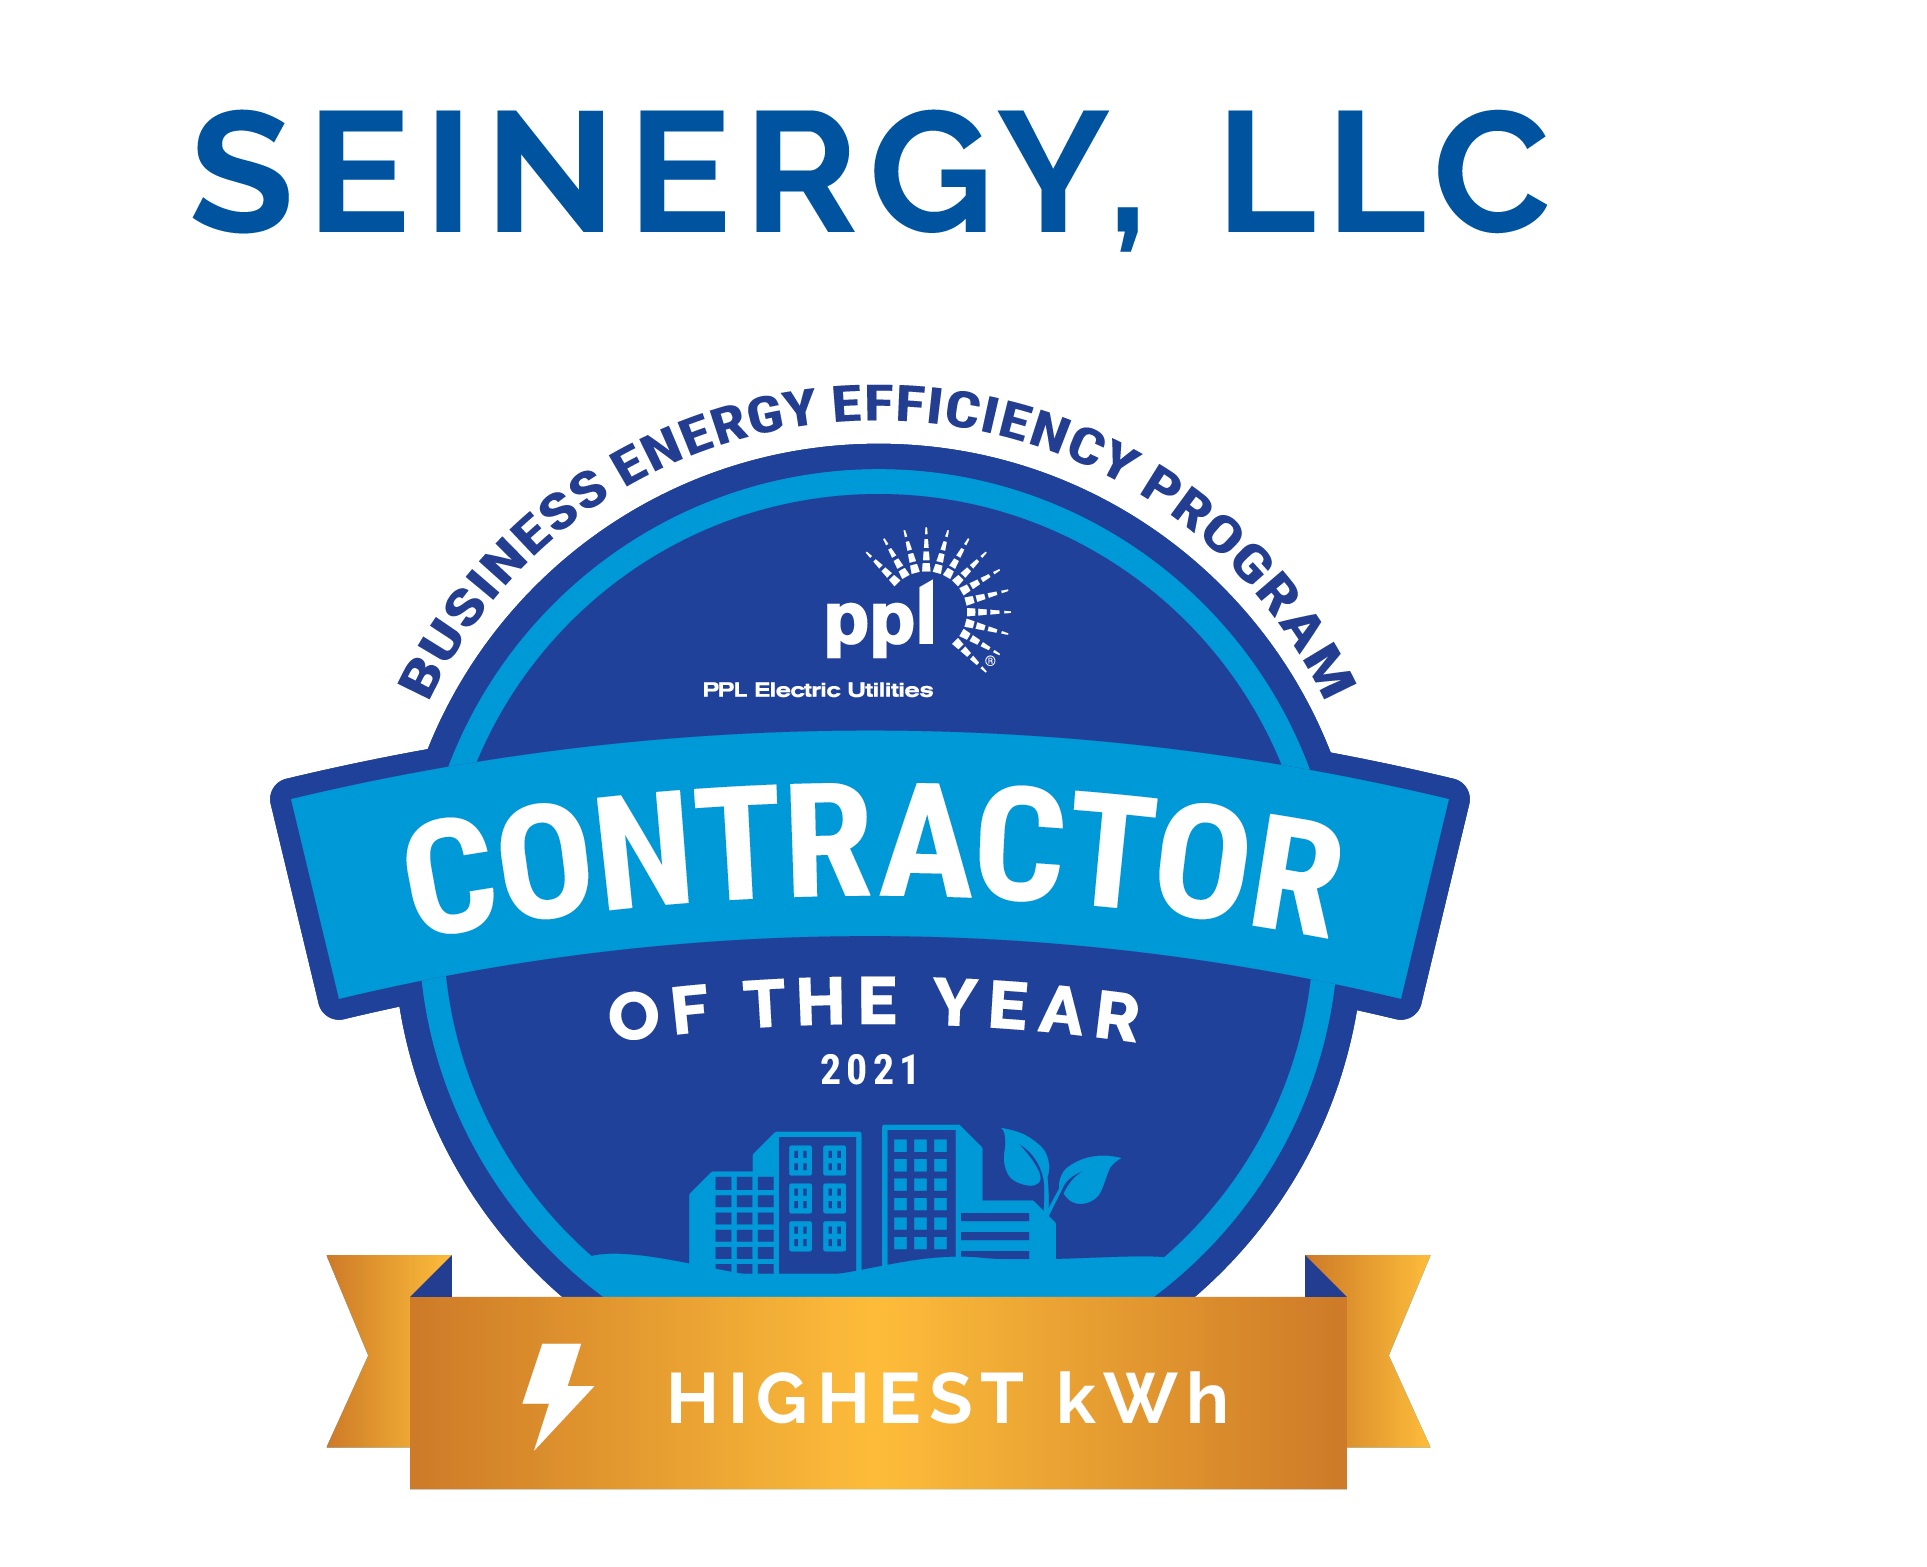 ppl-awards-seinergy-contractor-of-the-year-seinergy